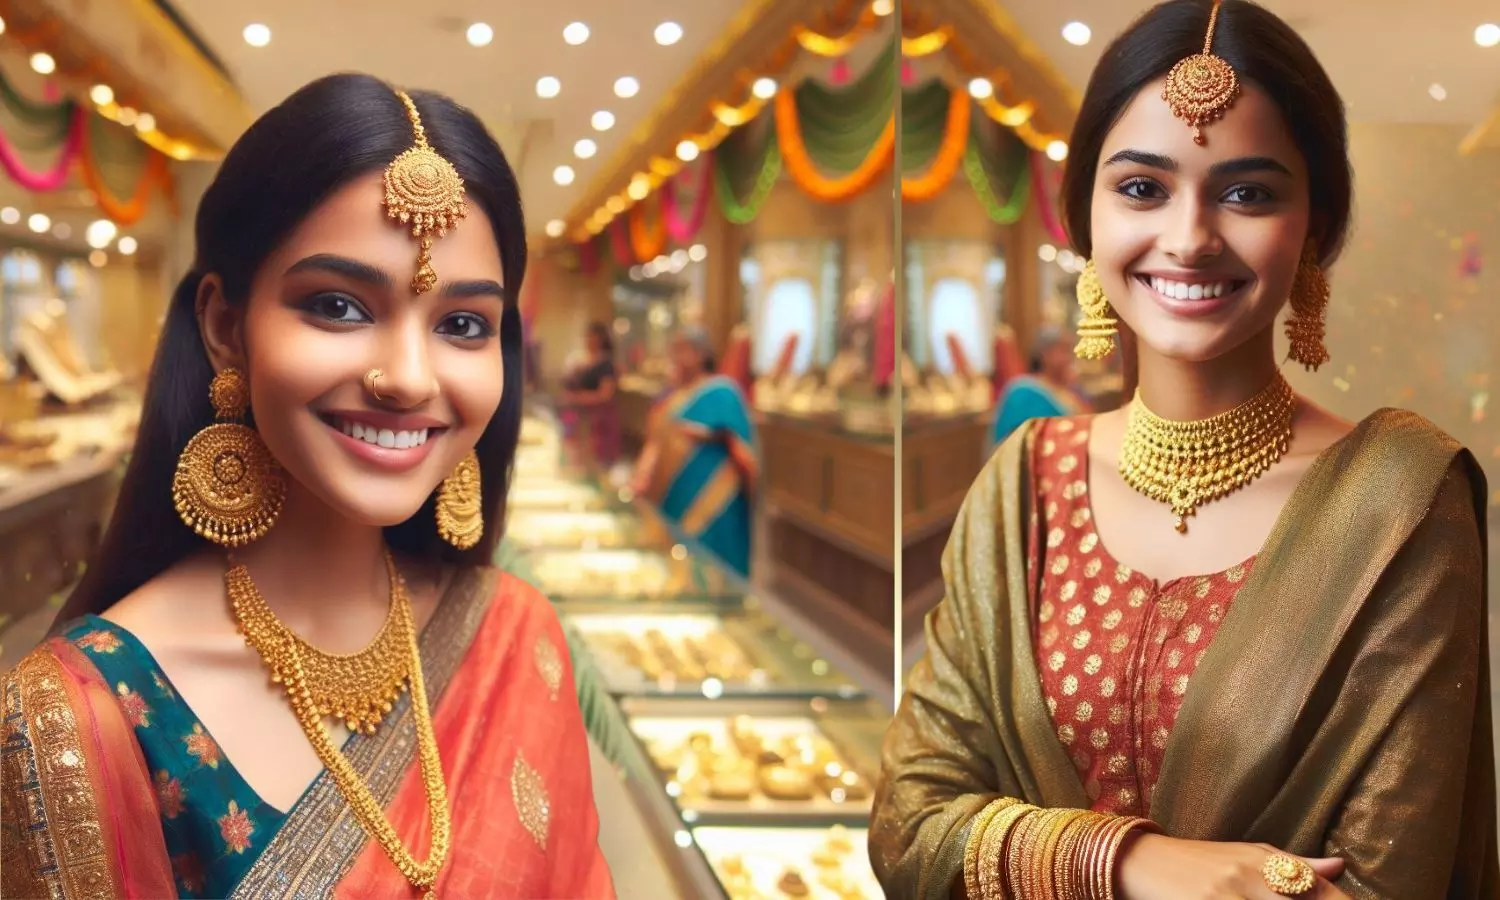 Indian women with gold jewelry